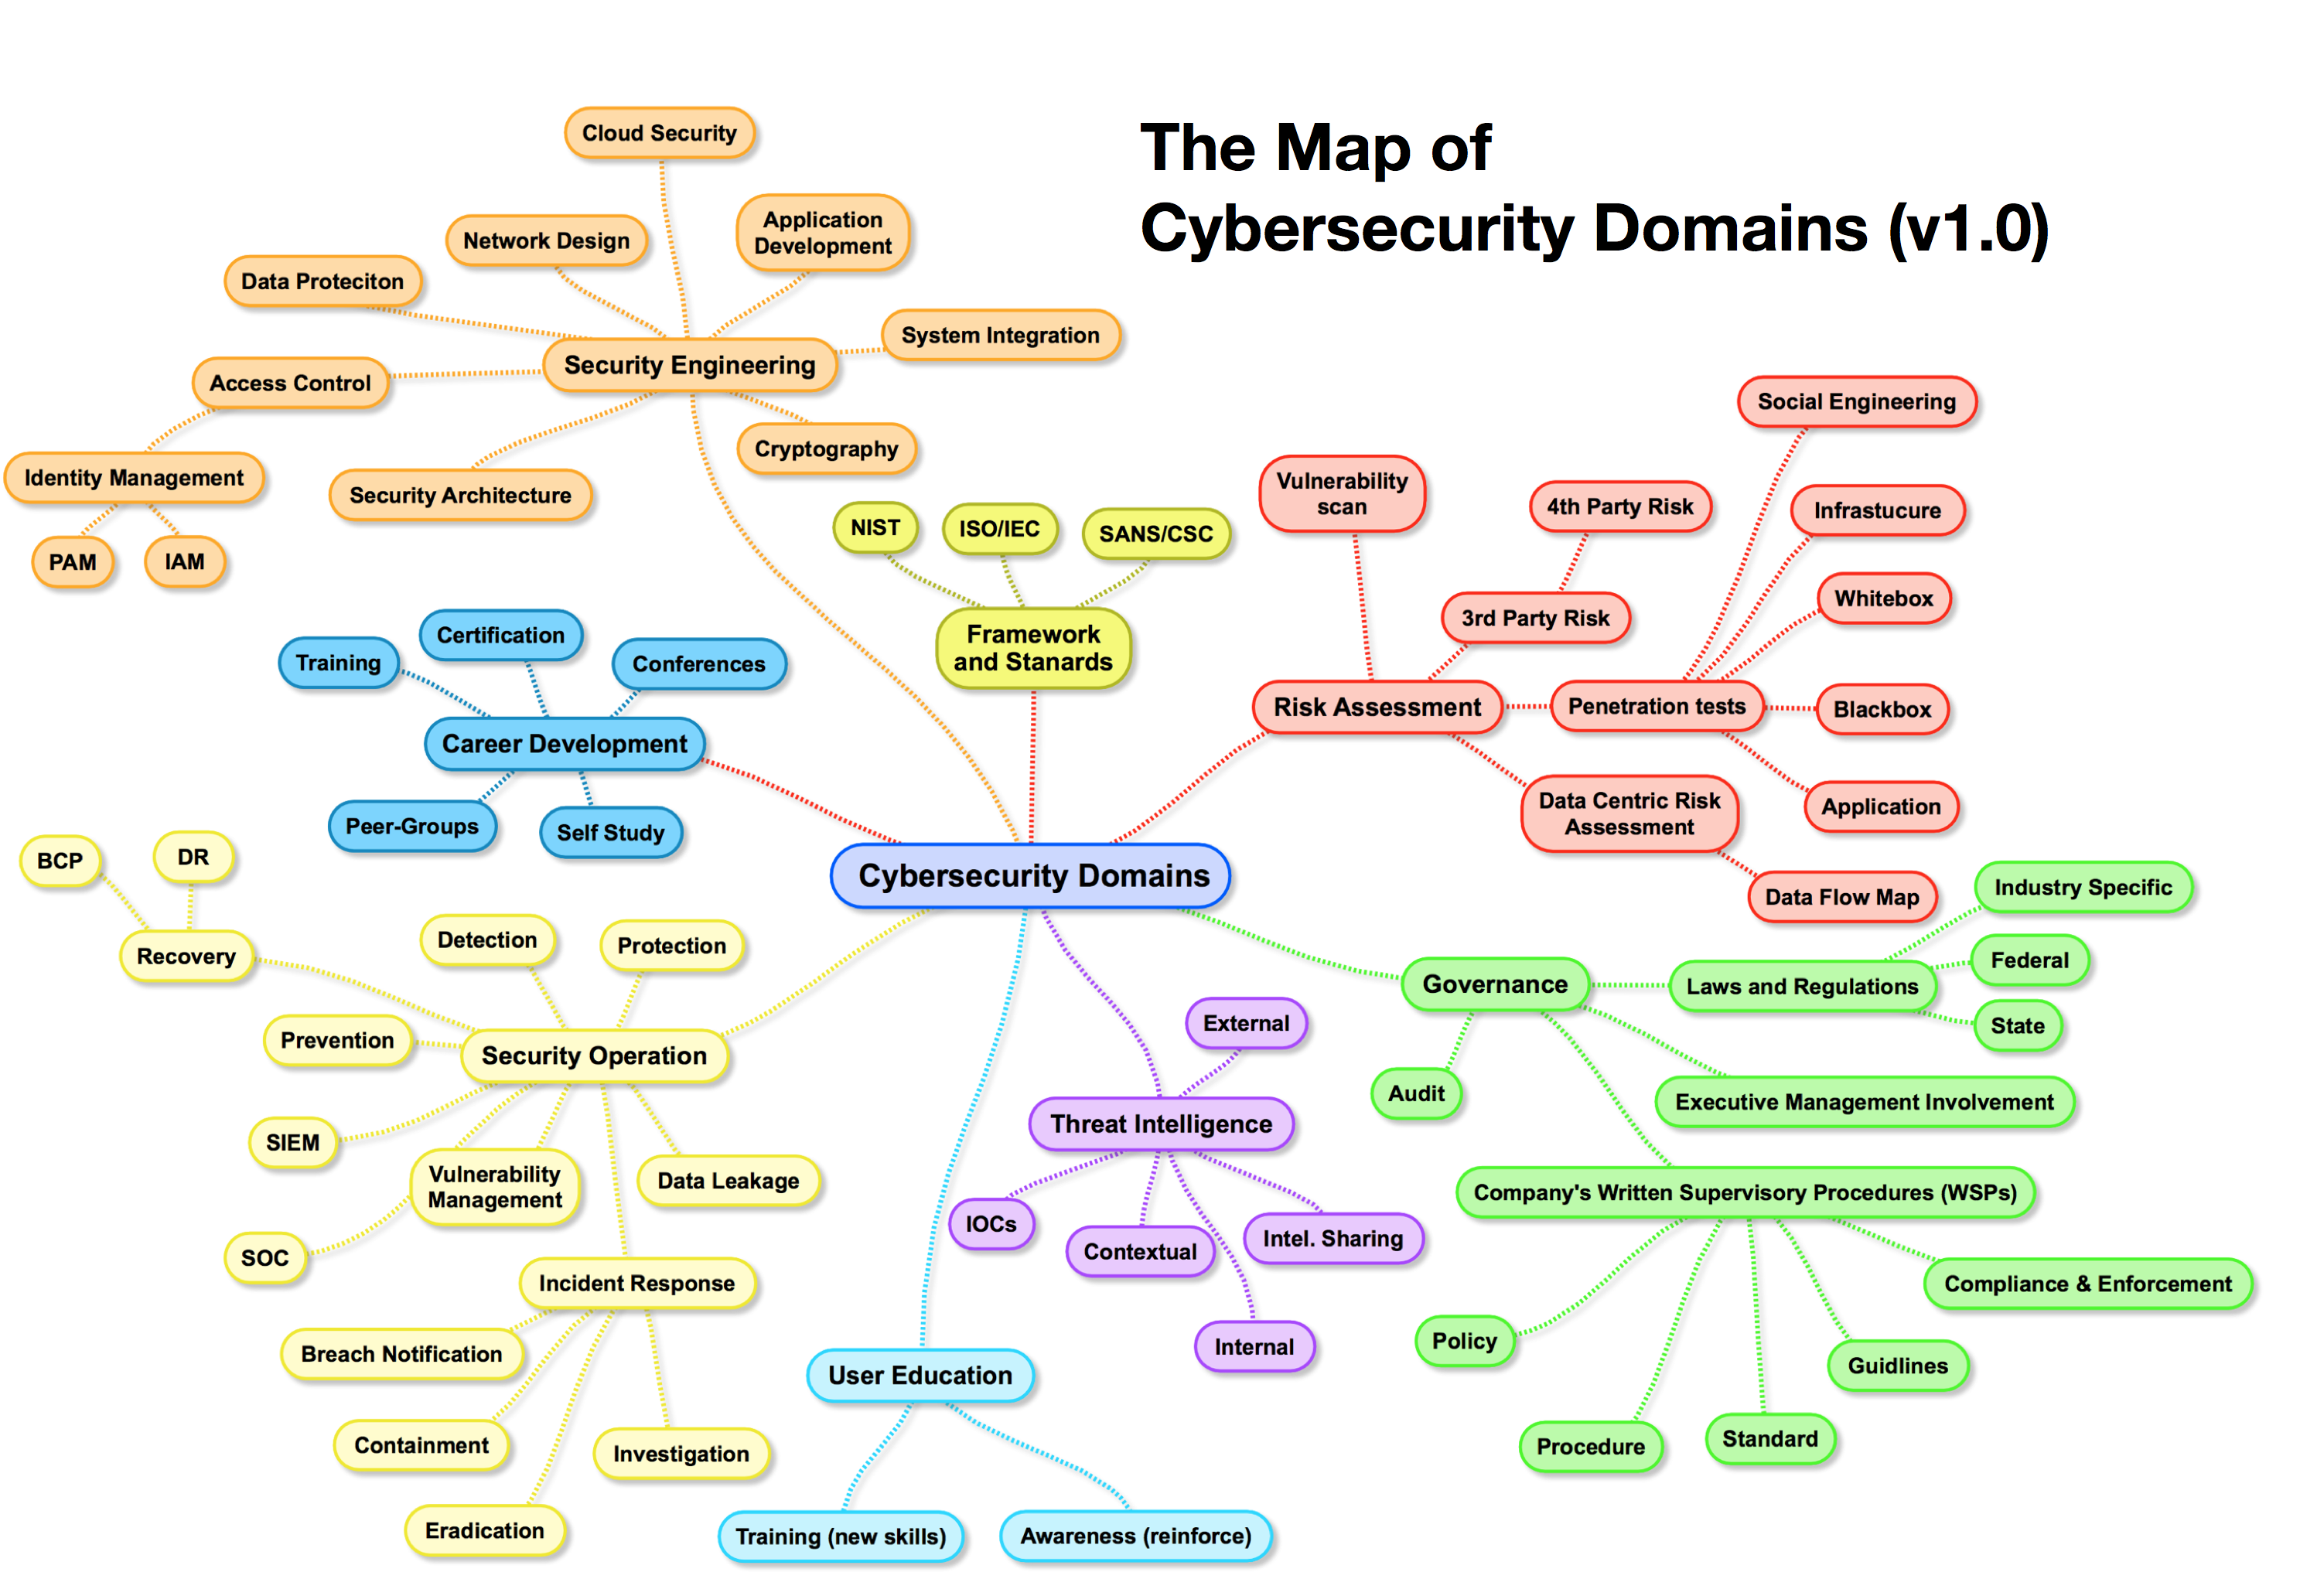 cybersecurity map 1 0 joapen projects